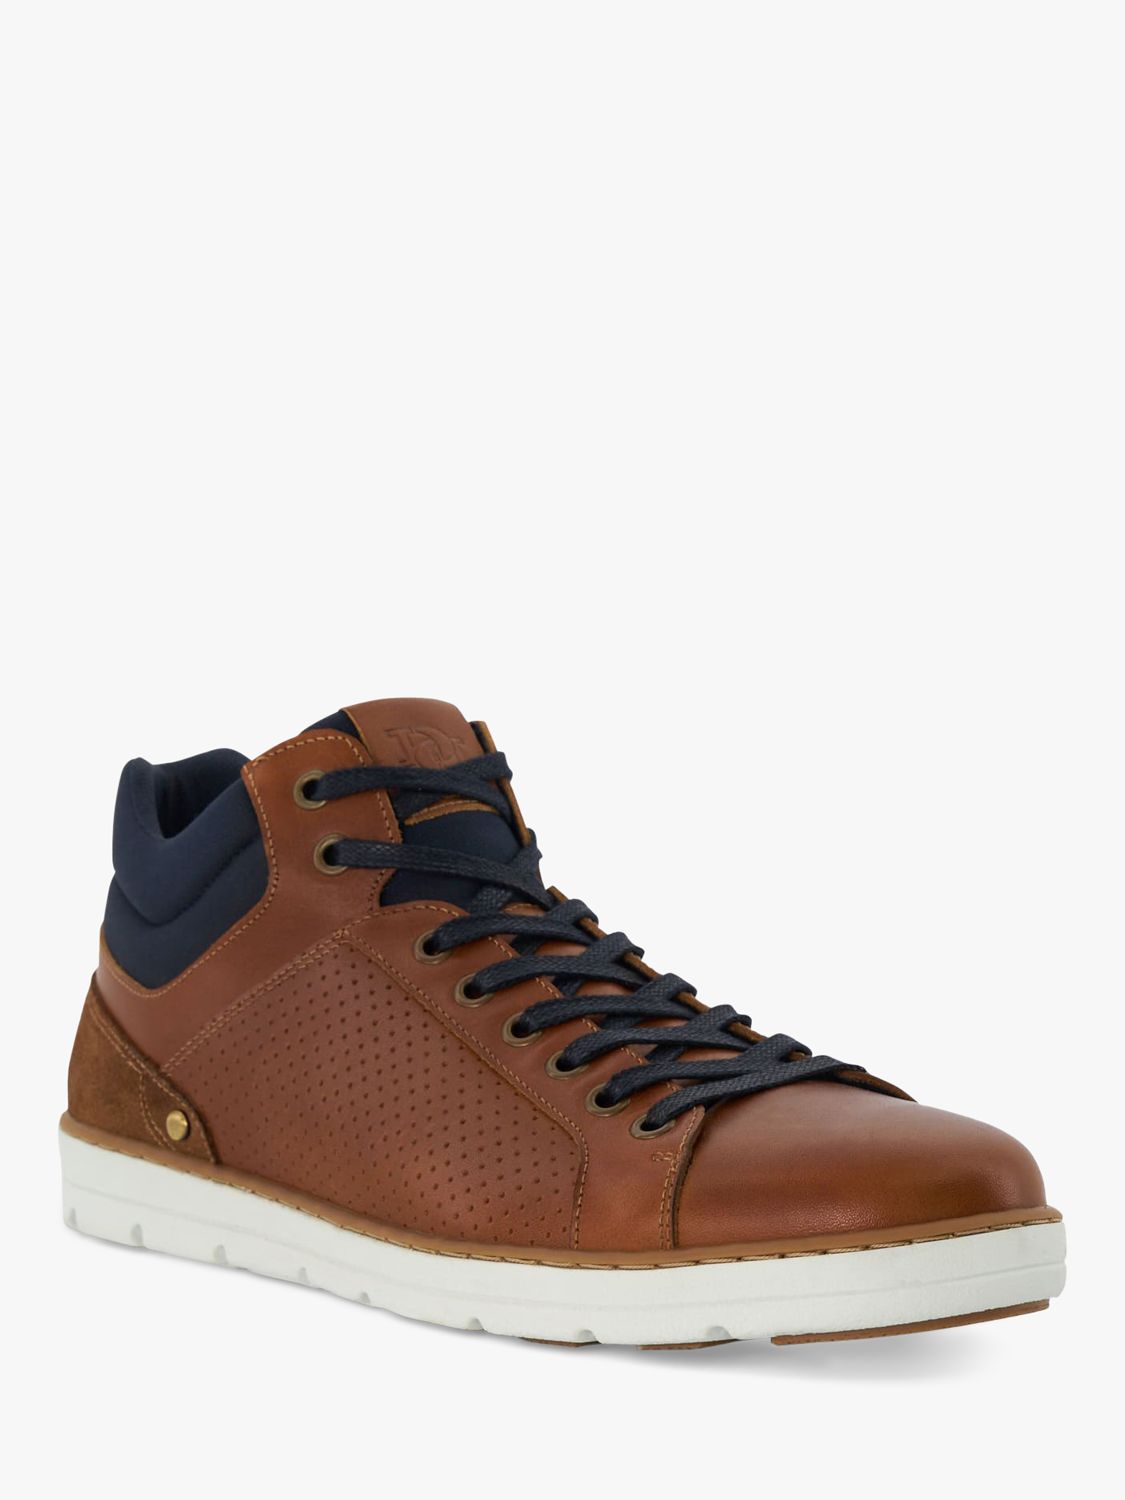 Buy Dune Southern Leather Hi-Top Trainers, Tan Online at johnlewis.com